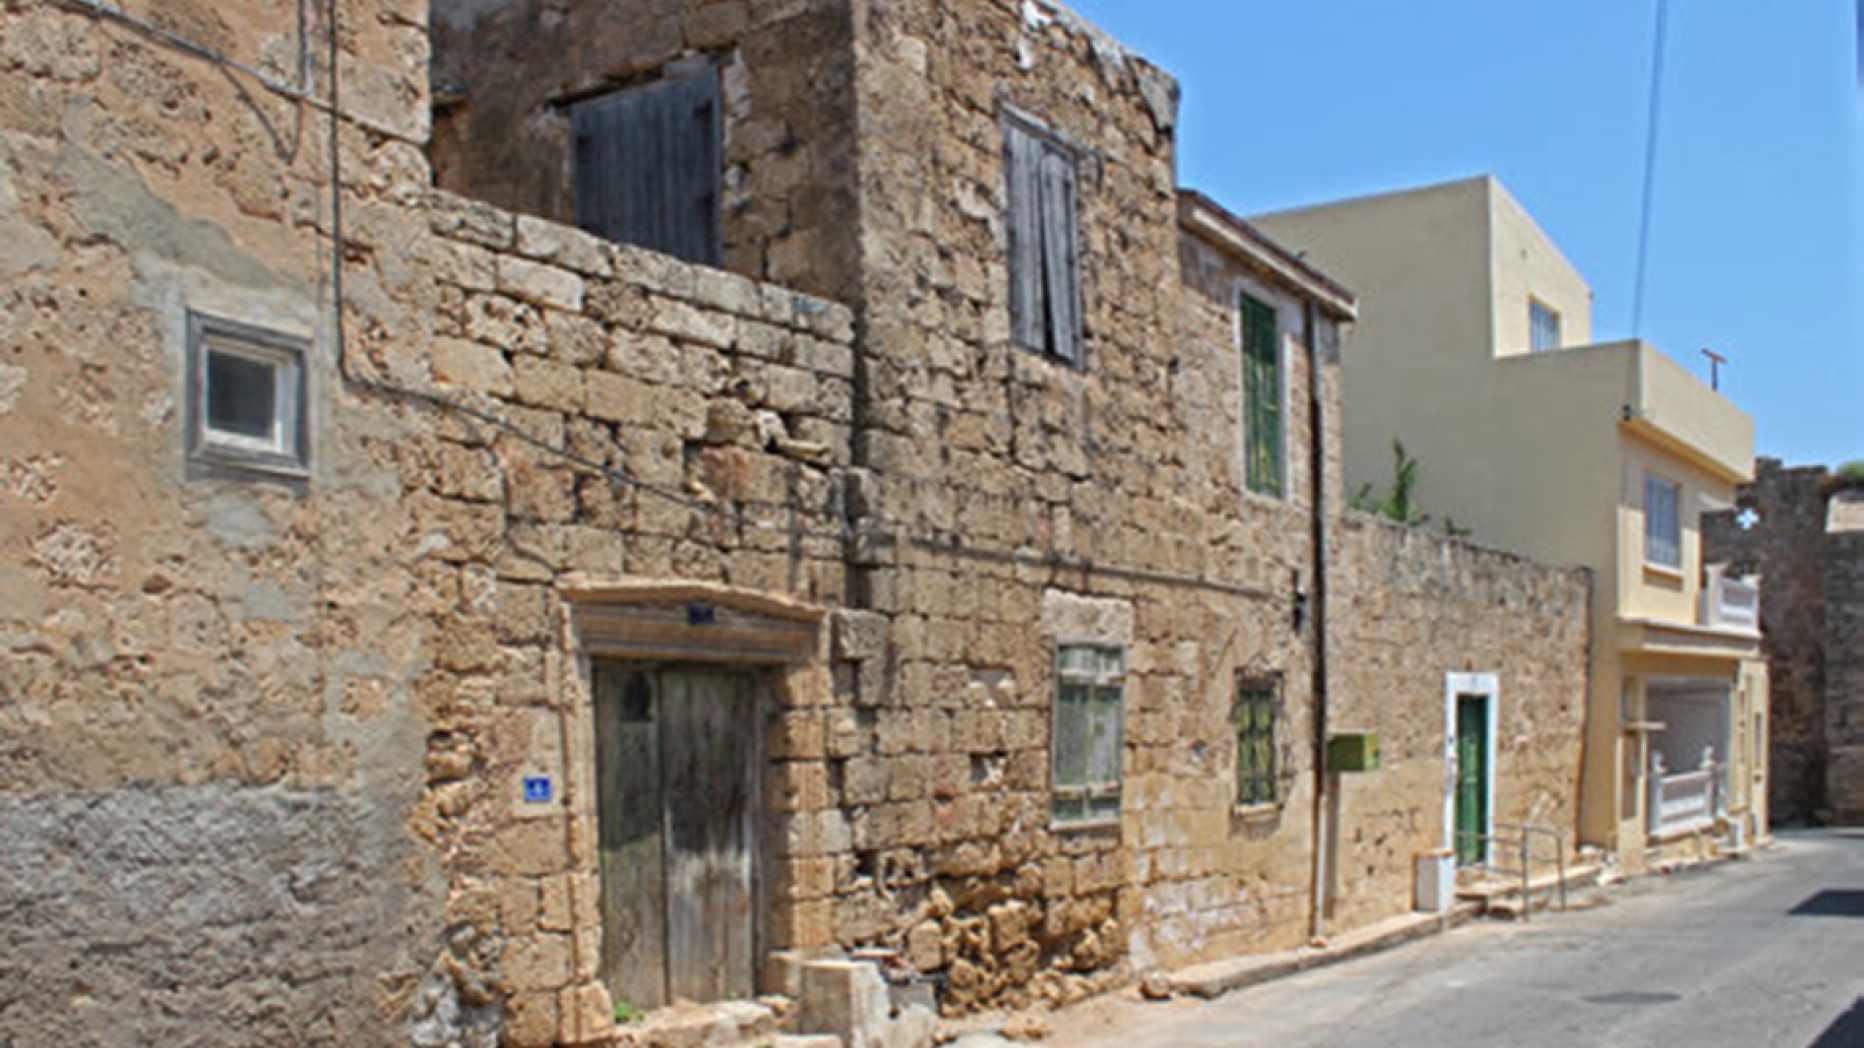 Typical streetscape in the Walled City